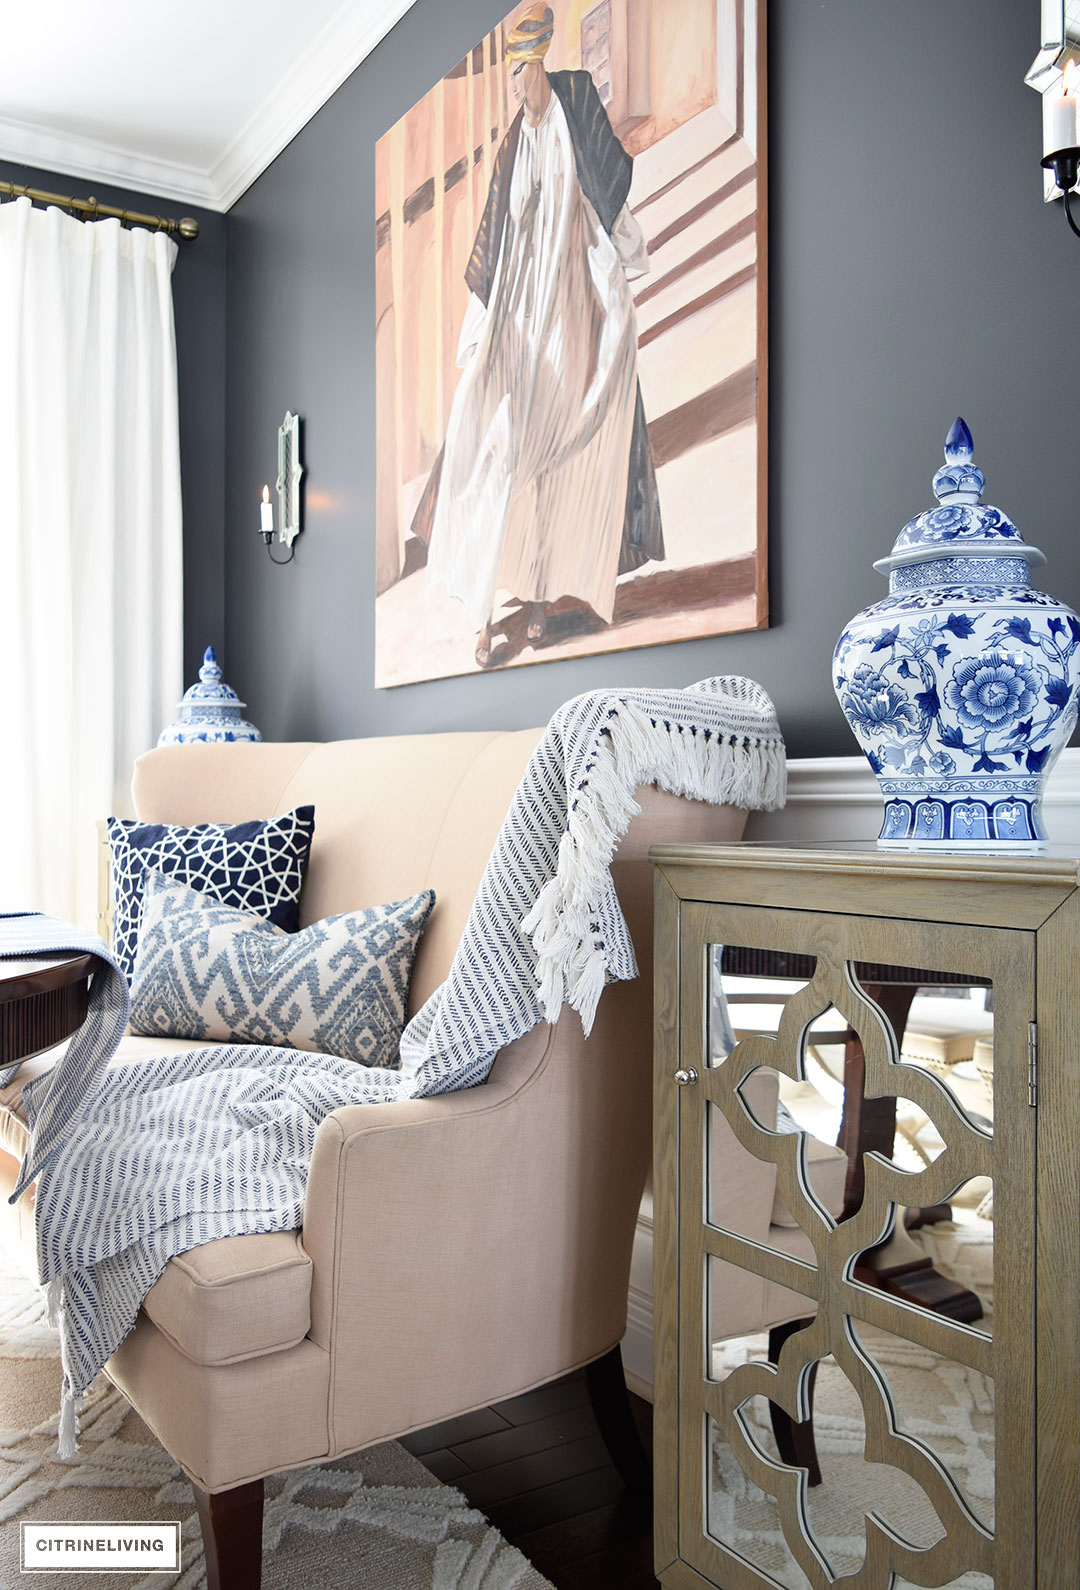 Spring decor - layers of blue and white pattern and texture is perfect for the season.